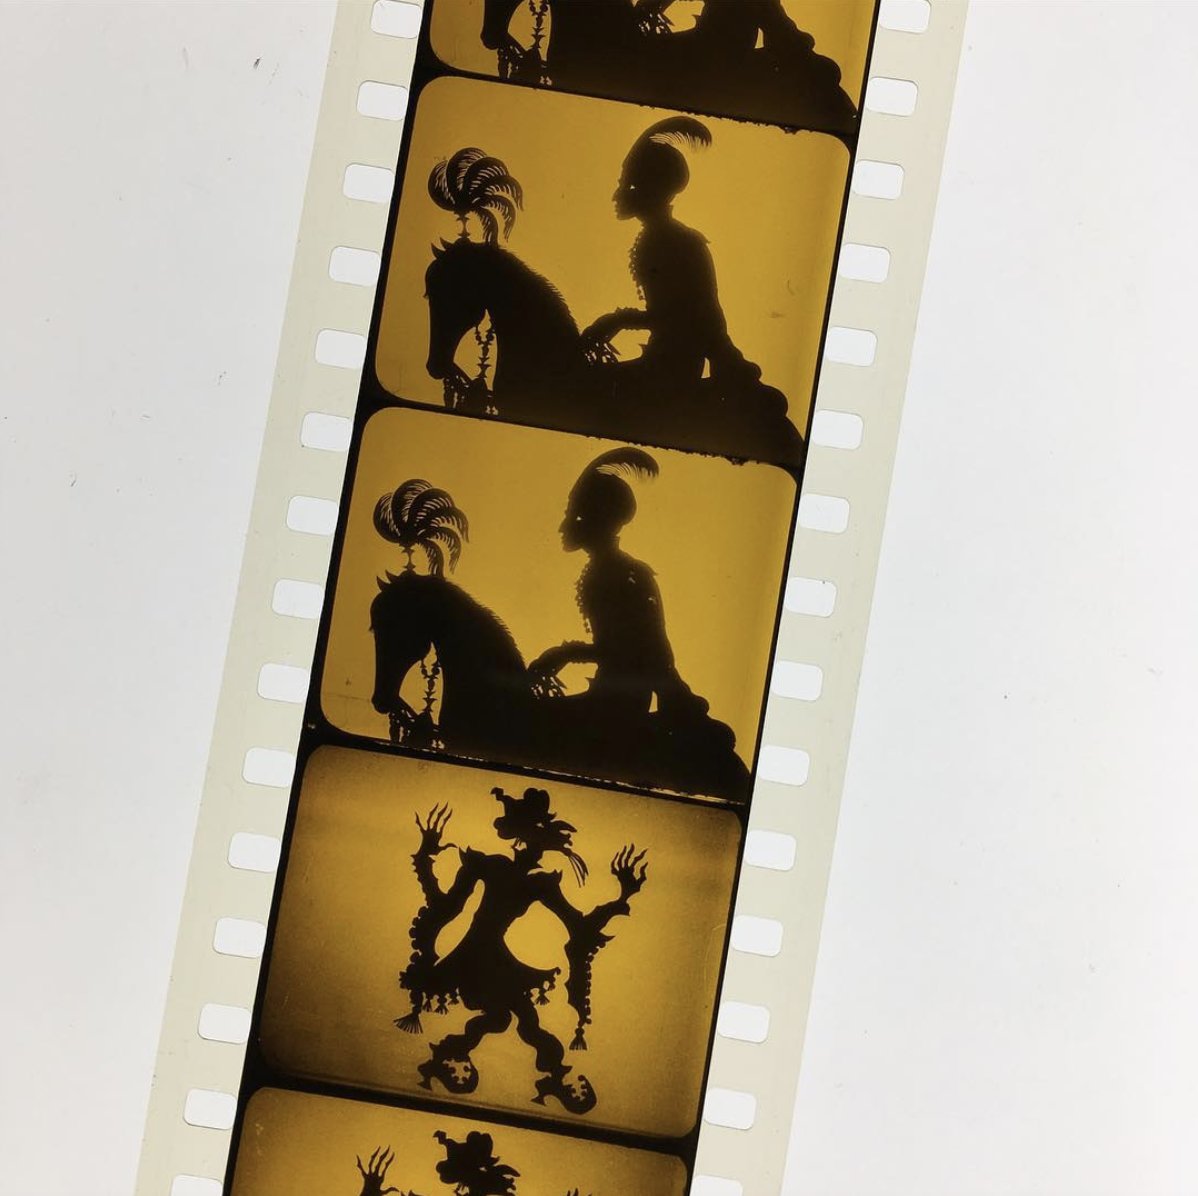 THE ADVENTURES OF PRINCE ACHMED (35mm)